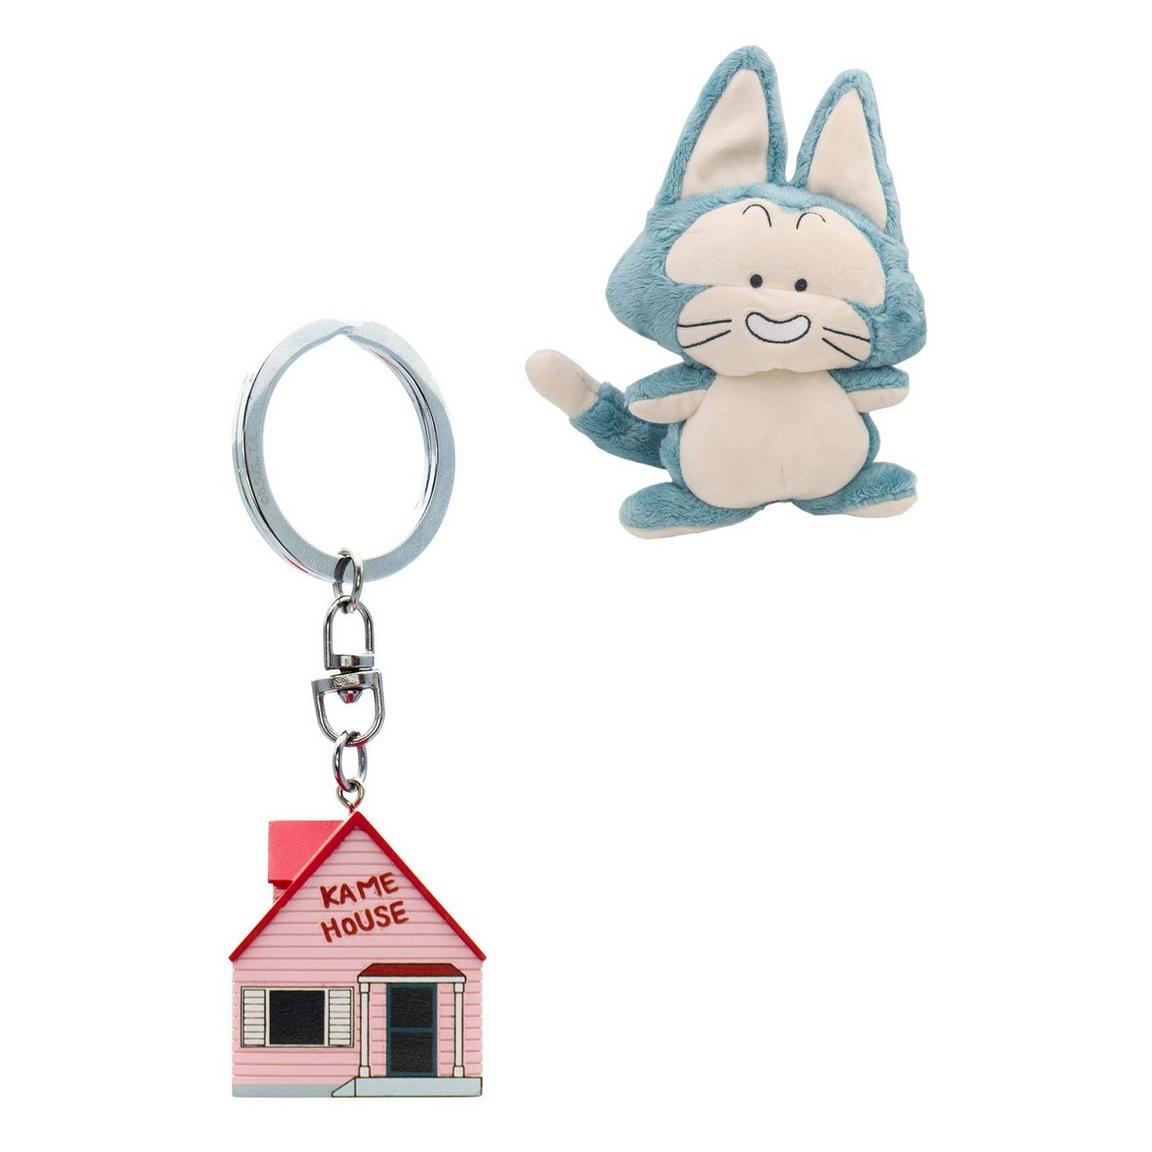 ABYstyle Dragon Ball Z Puar and Kame House Keychain Bundle